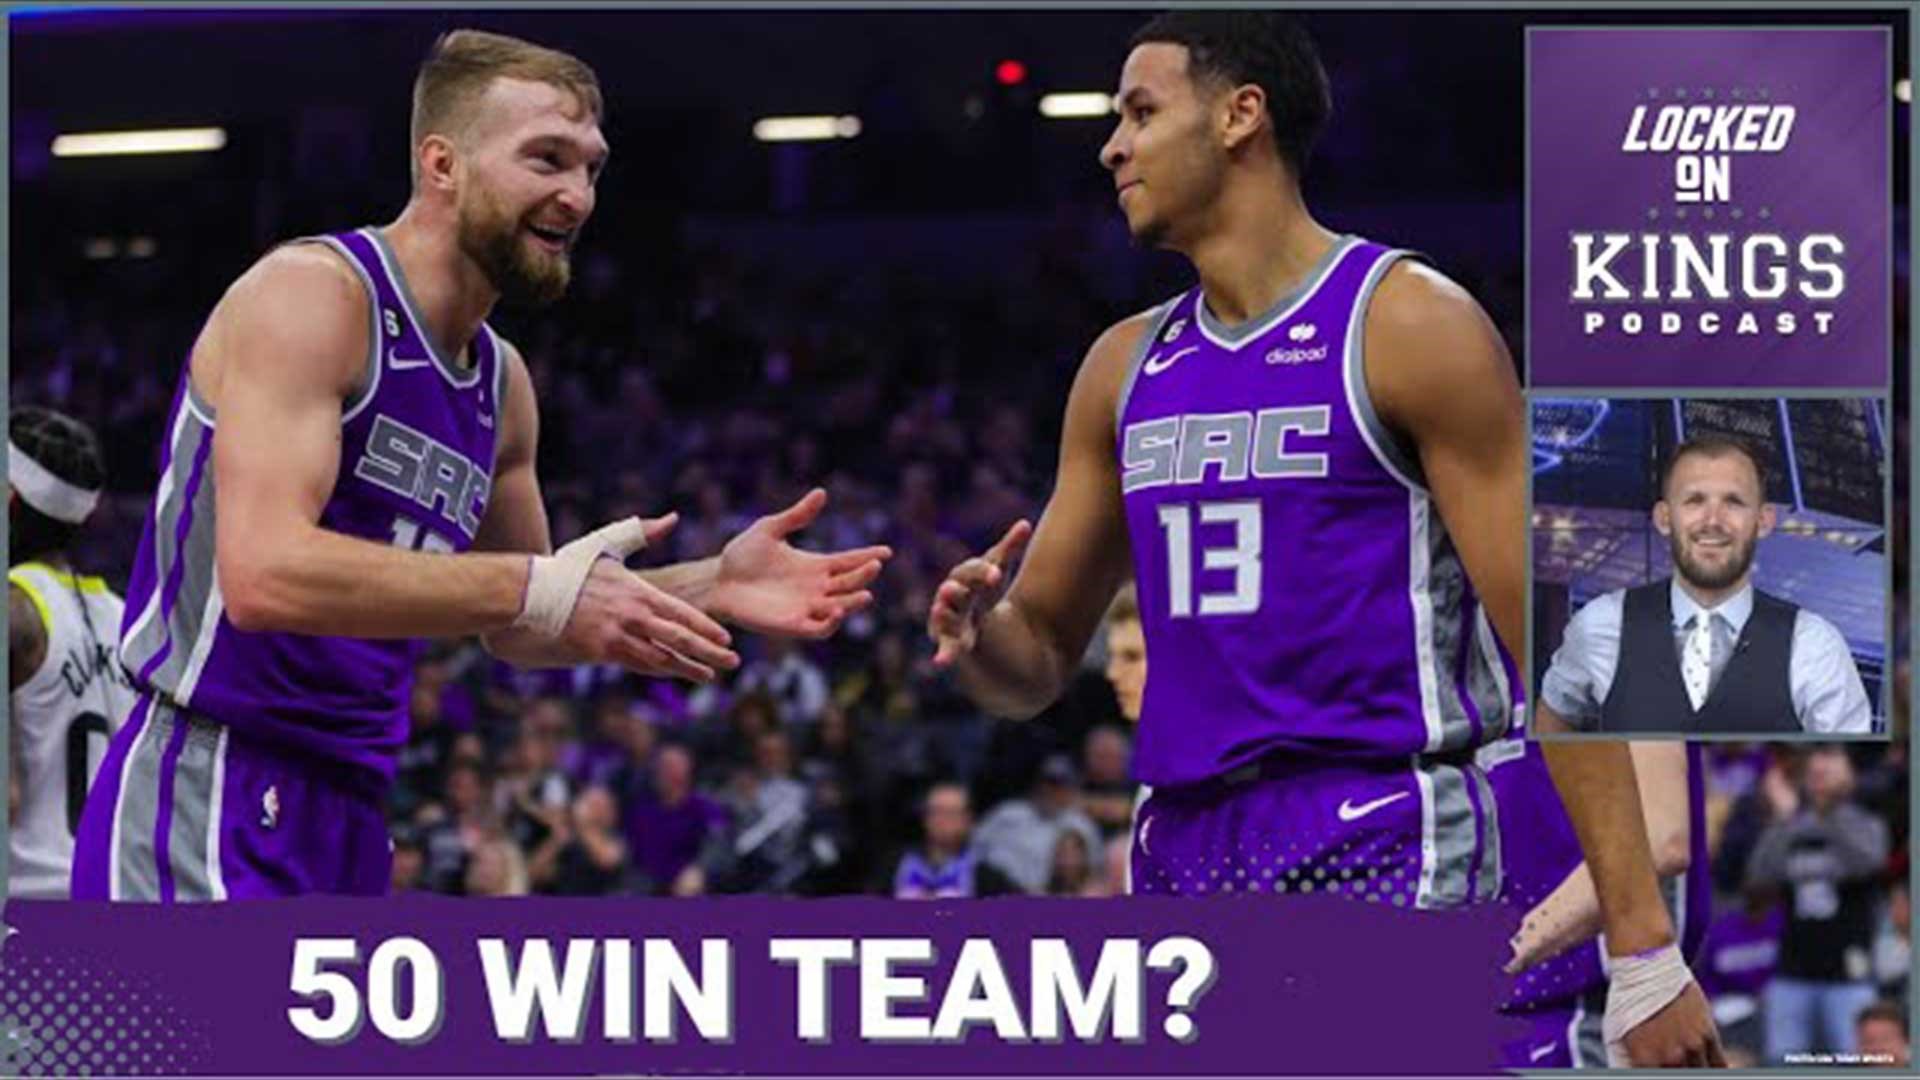 Matt George shares his list of what needs to happen this season for the Sacramento Kings to accomplish their goal of becoming a 50-win team.